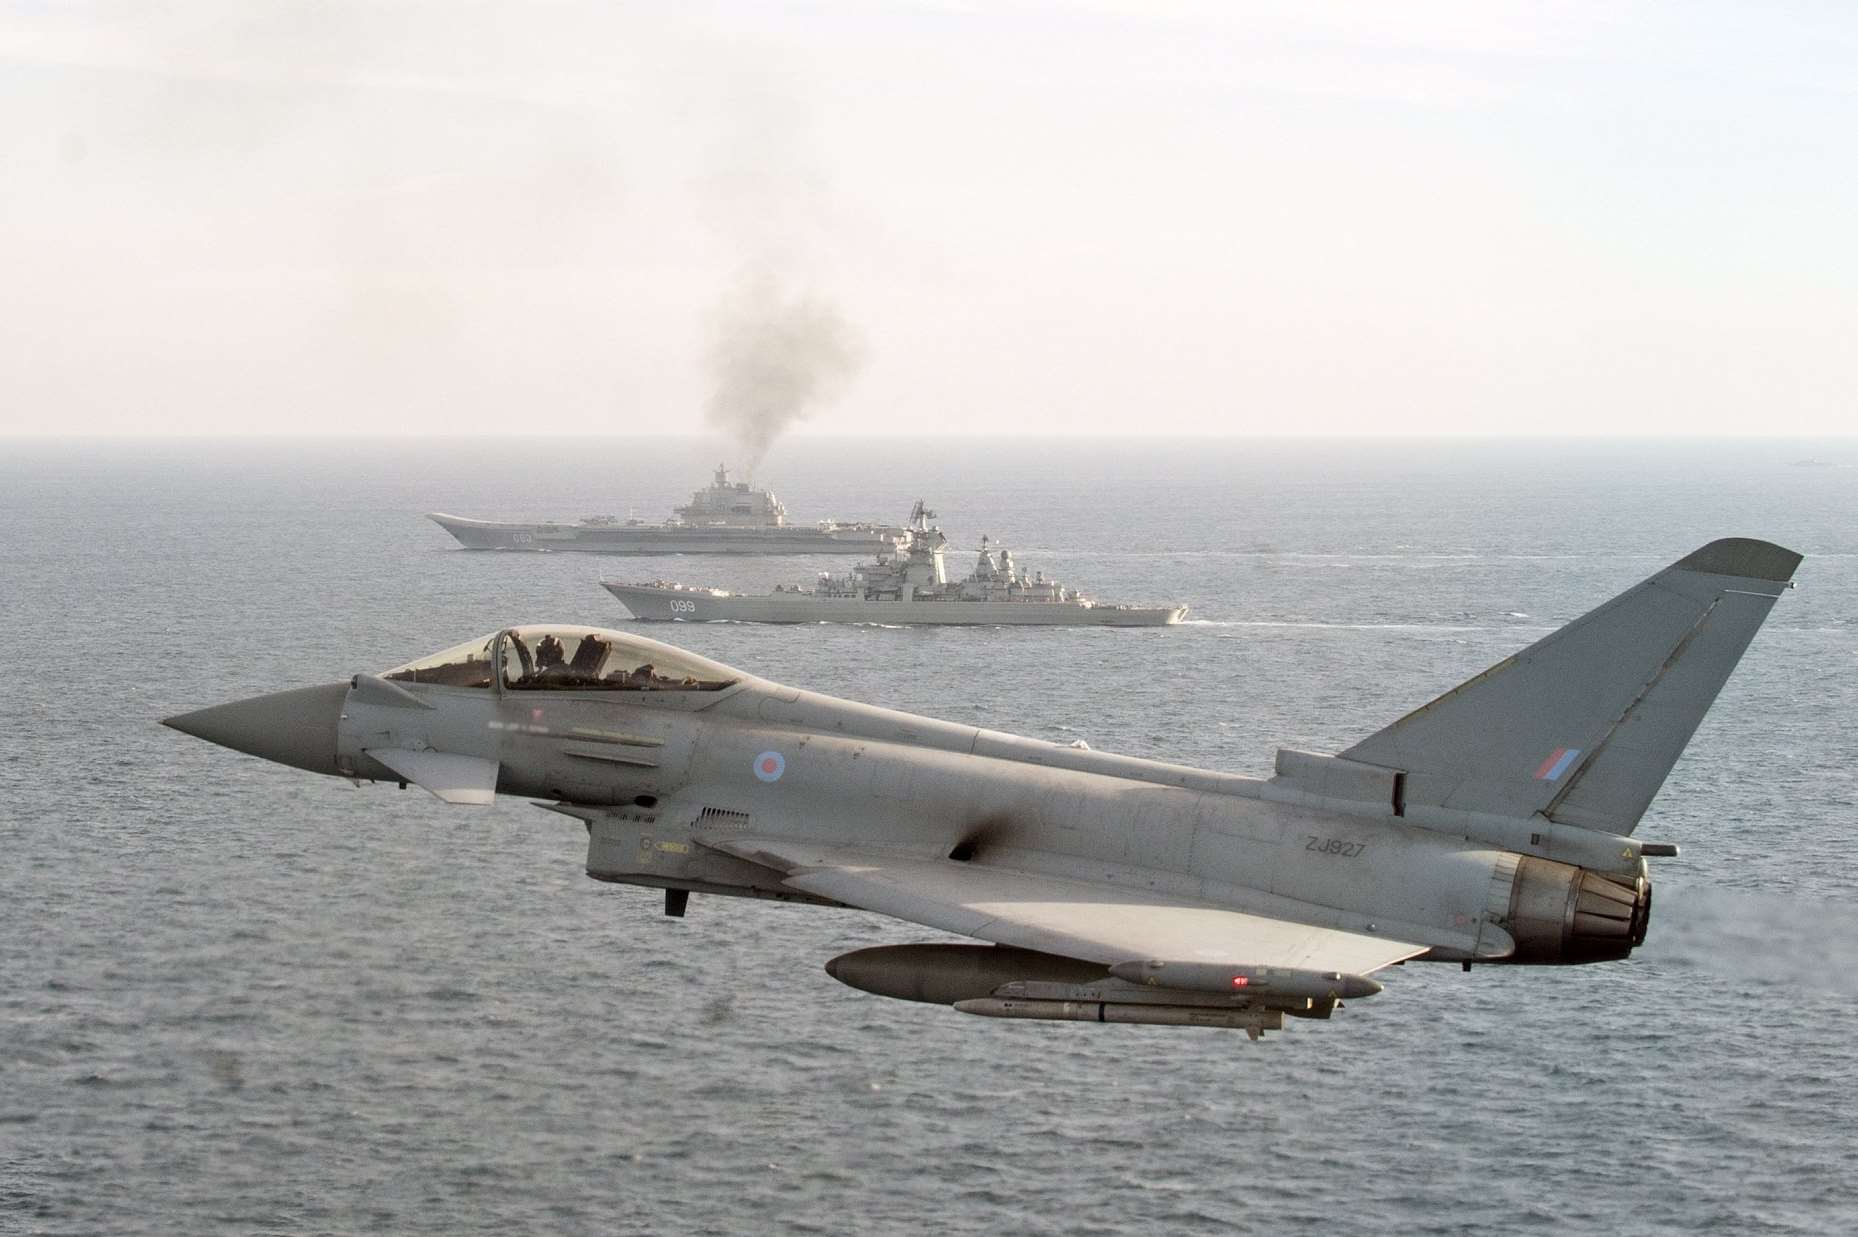 RAF Typhoon jets joined the British frigate to escort Russian warships through the Channel. Picture: MoD/Royal Navy